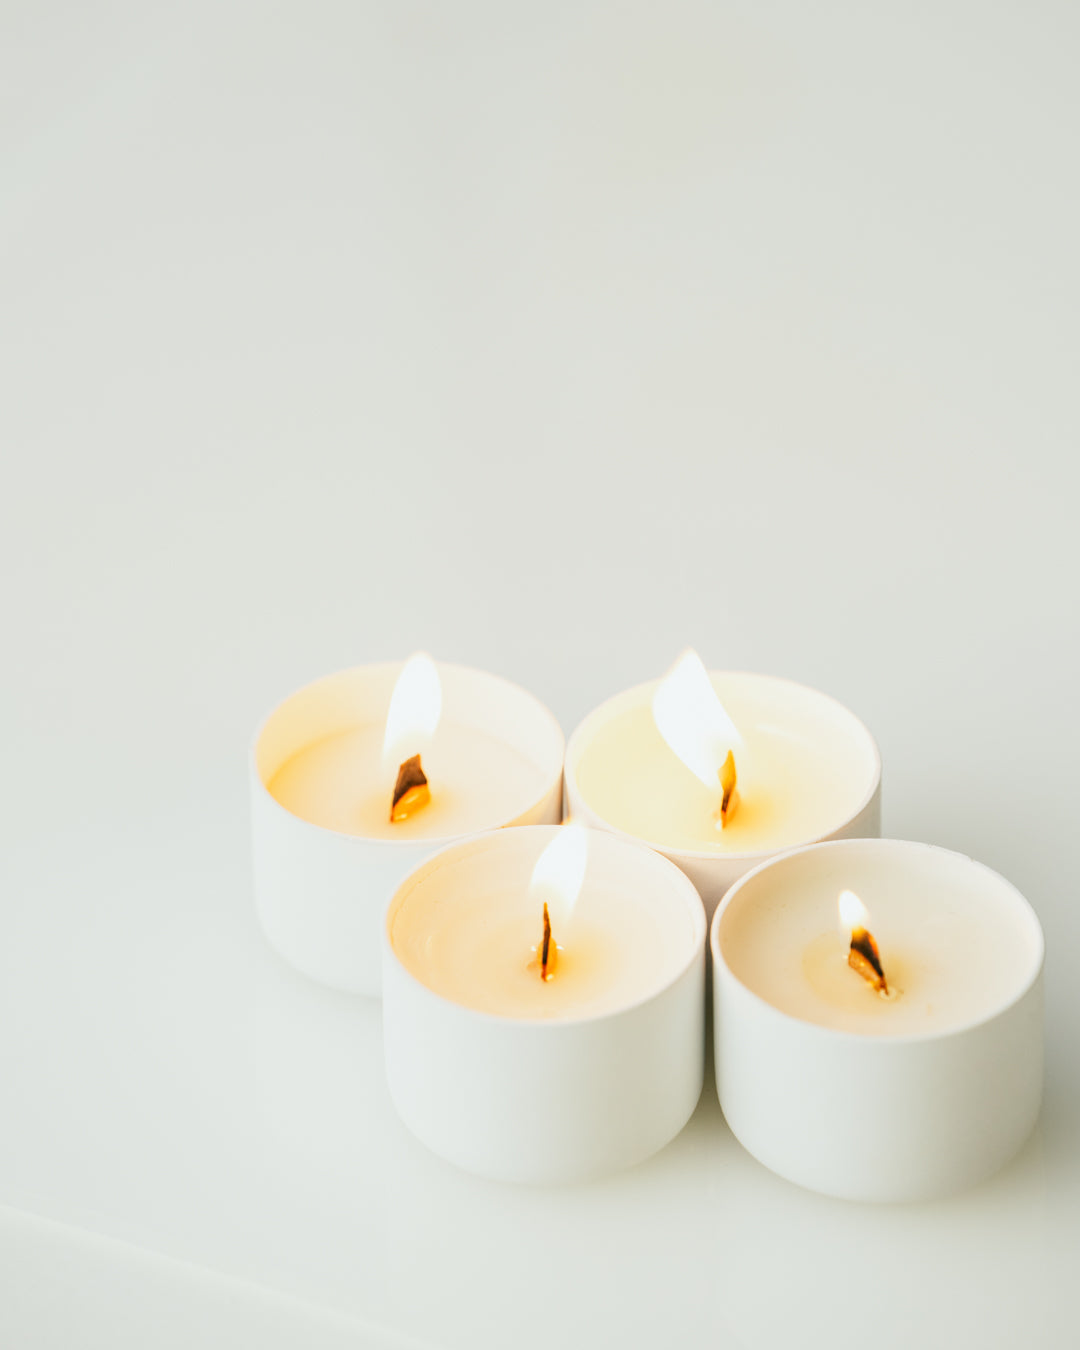 Four lit tealight candles sitting atop a white backdrop.